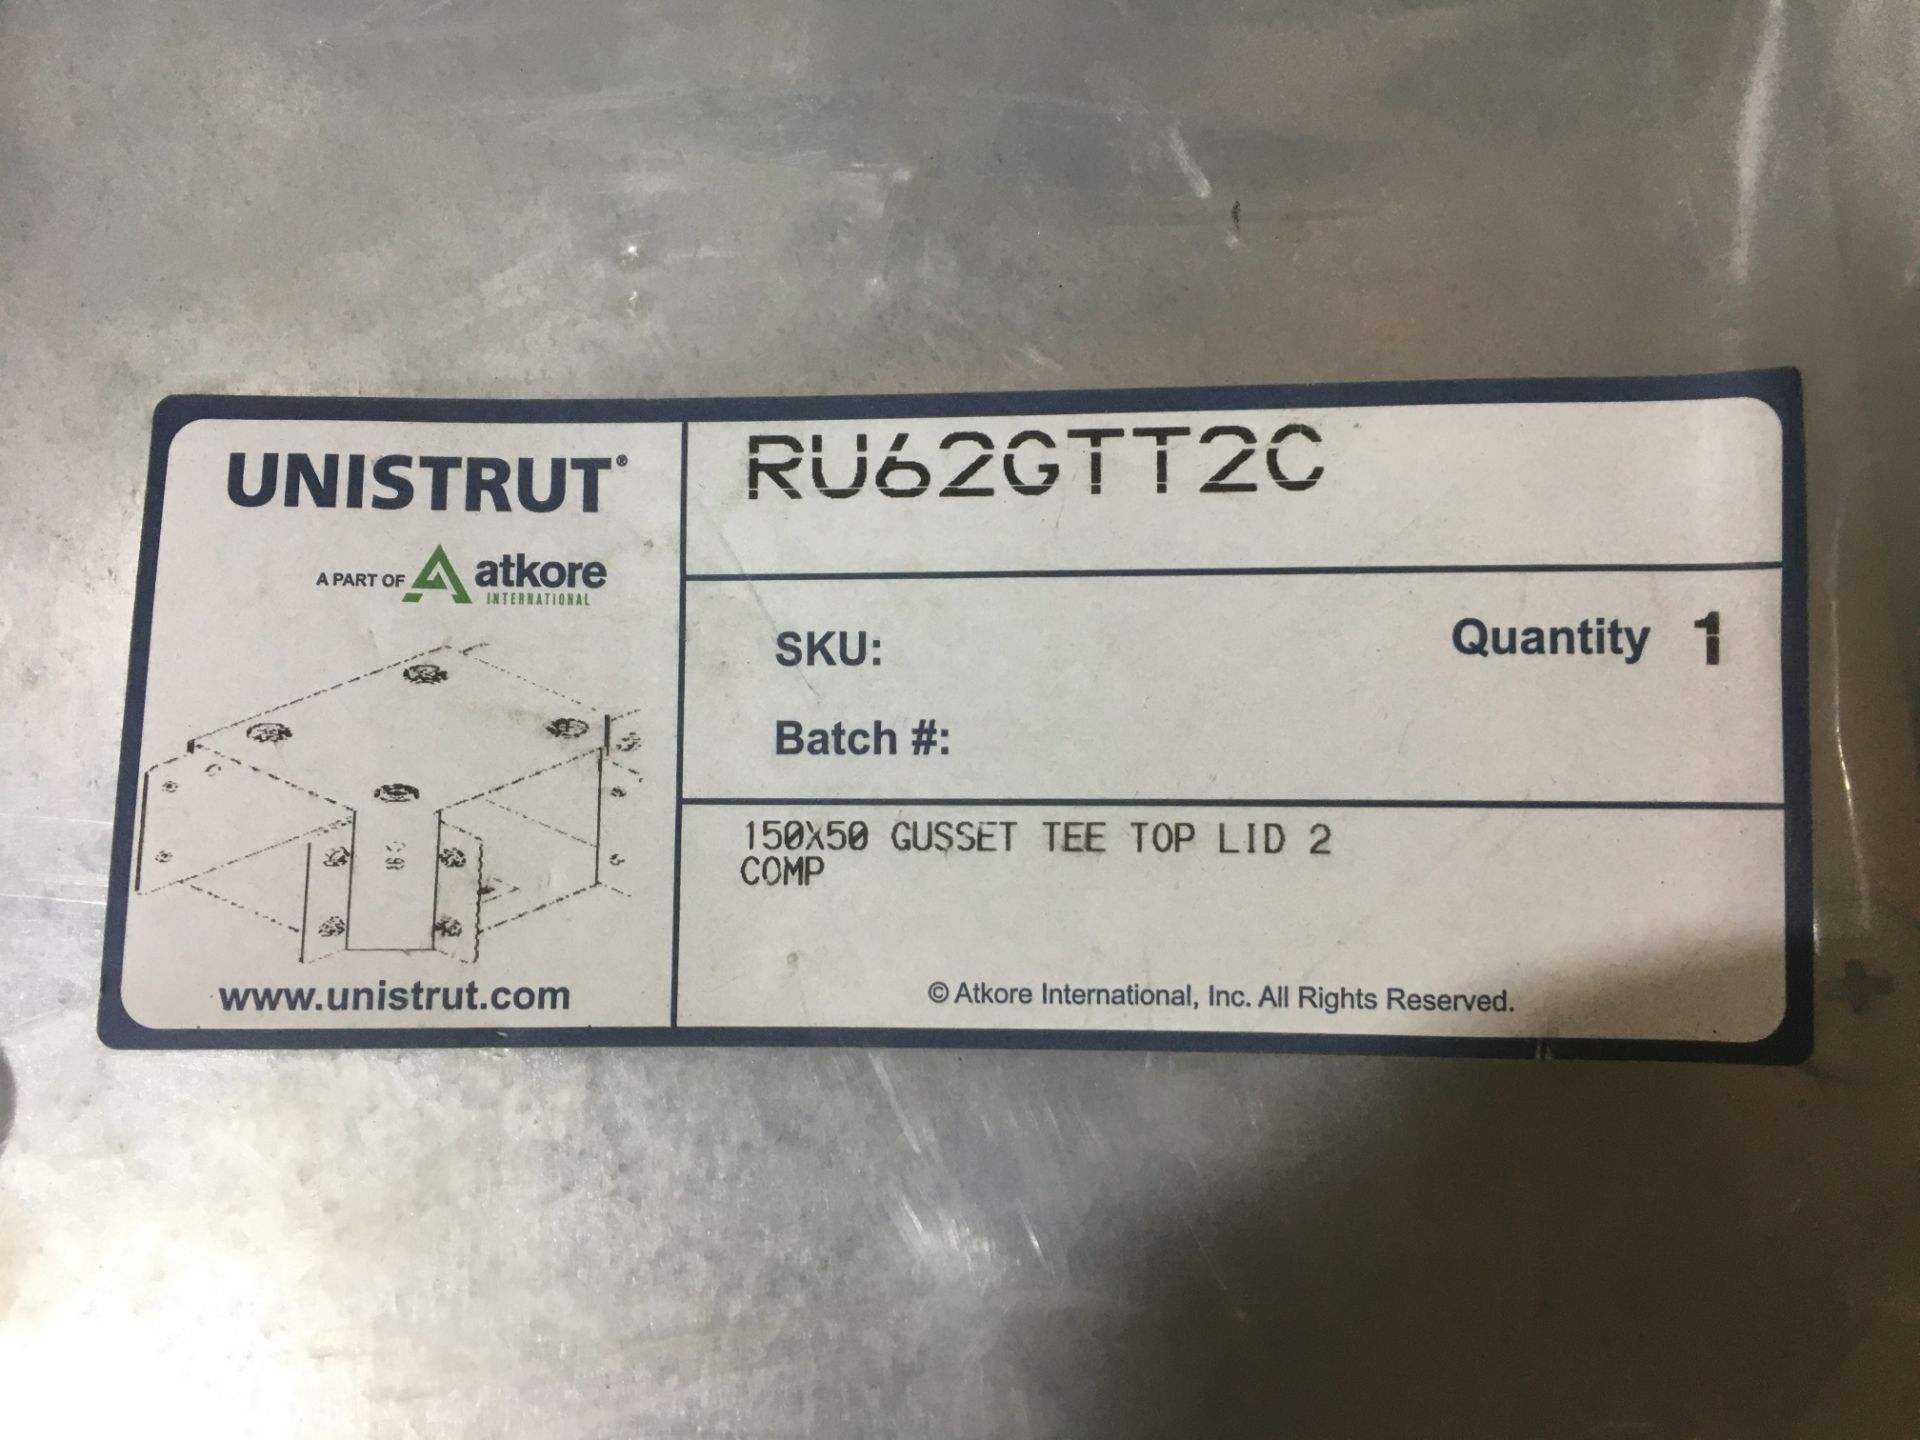 14 x Packs of Various Unistrut Trunking Brackets & Gussets - As Pictured - Image 4 of 6